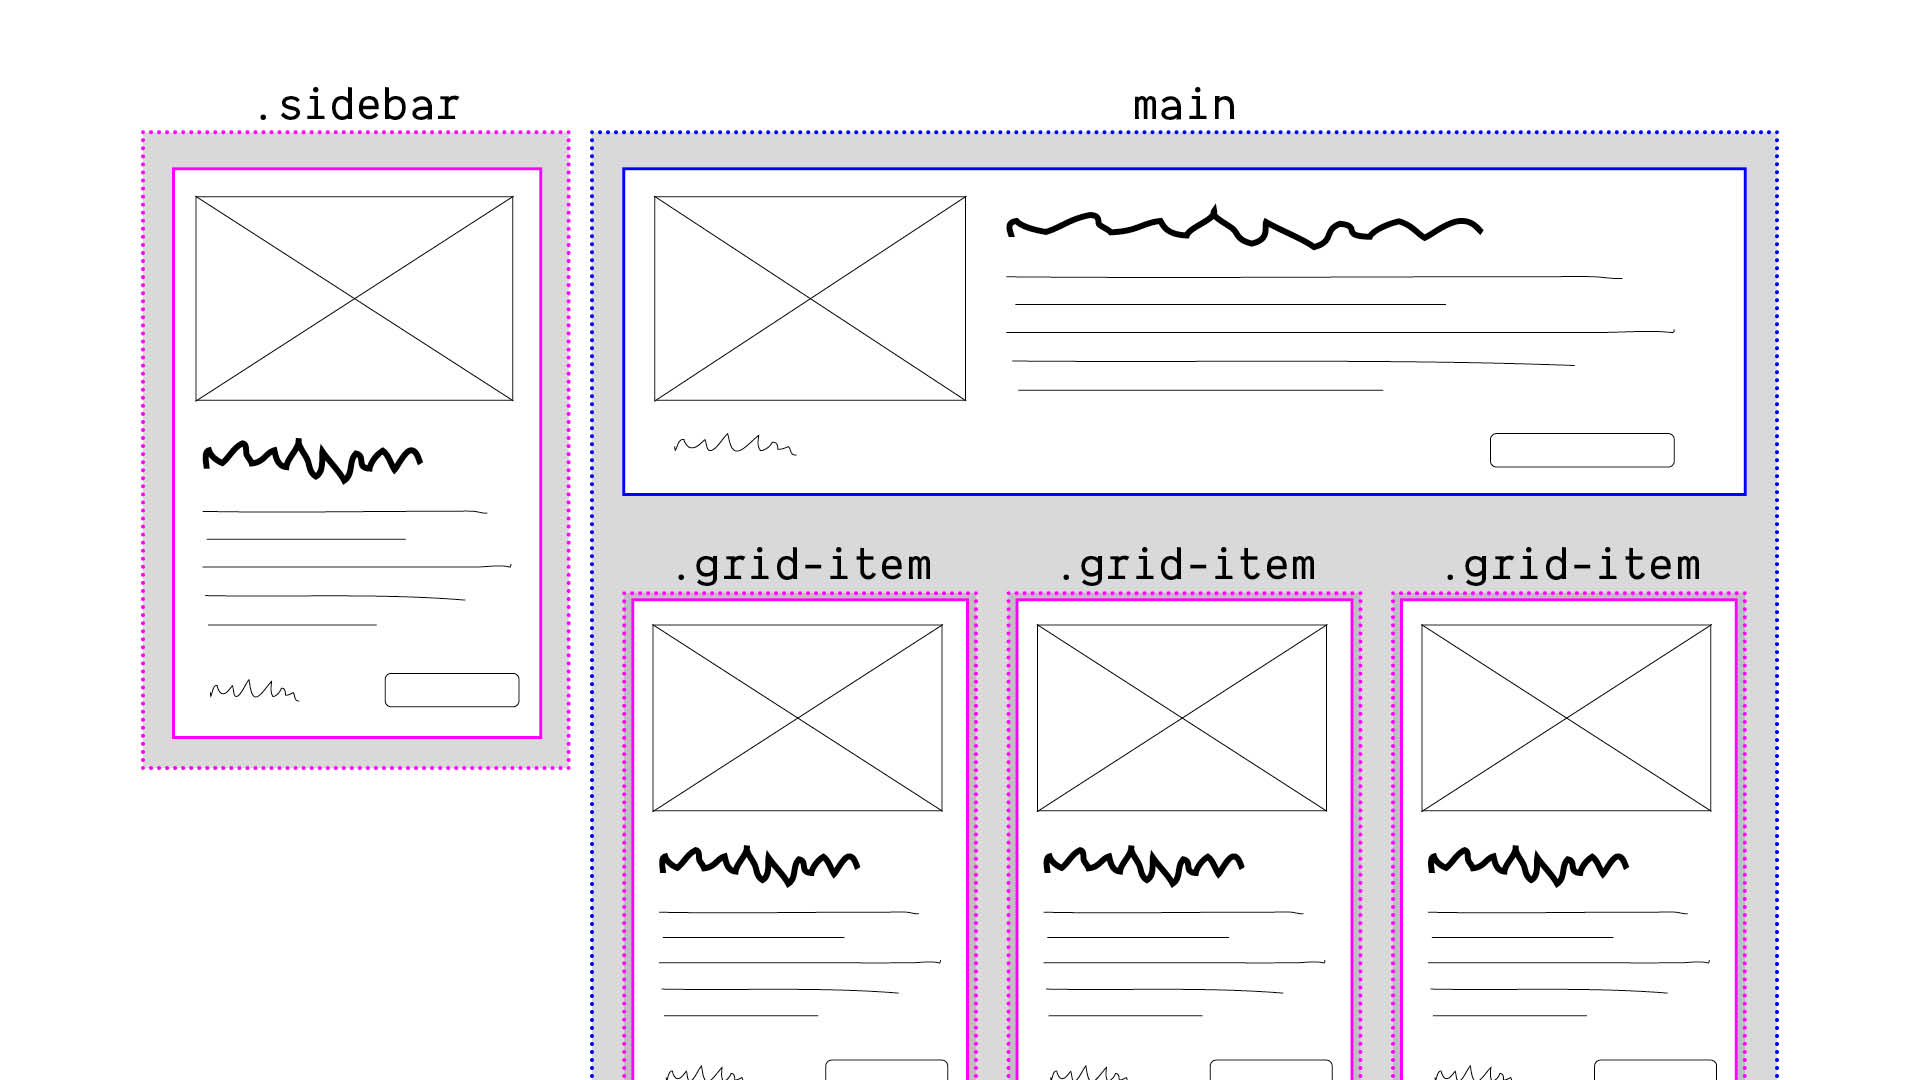 Nested grid-item containers
inside the main container,
also use small card layout
